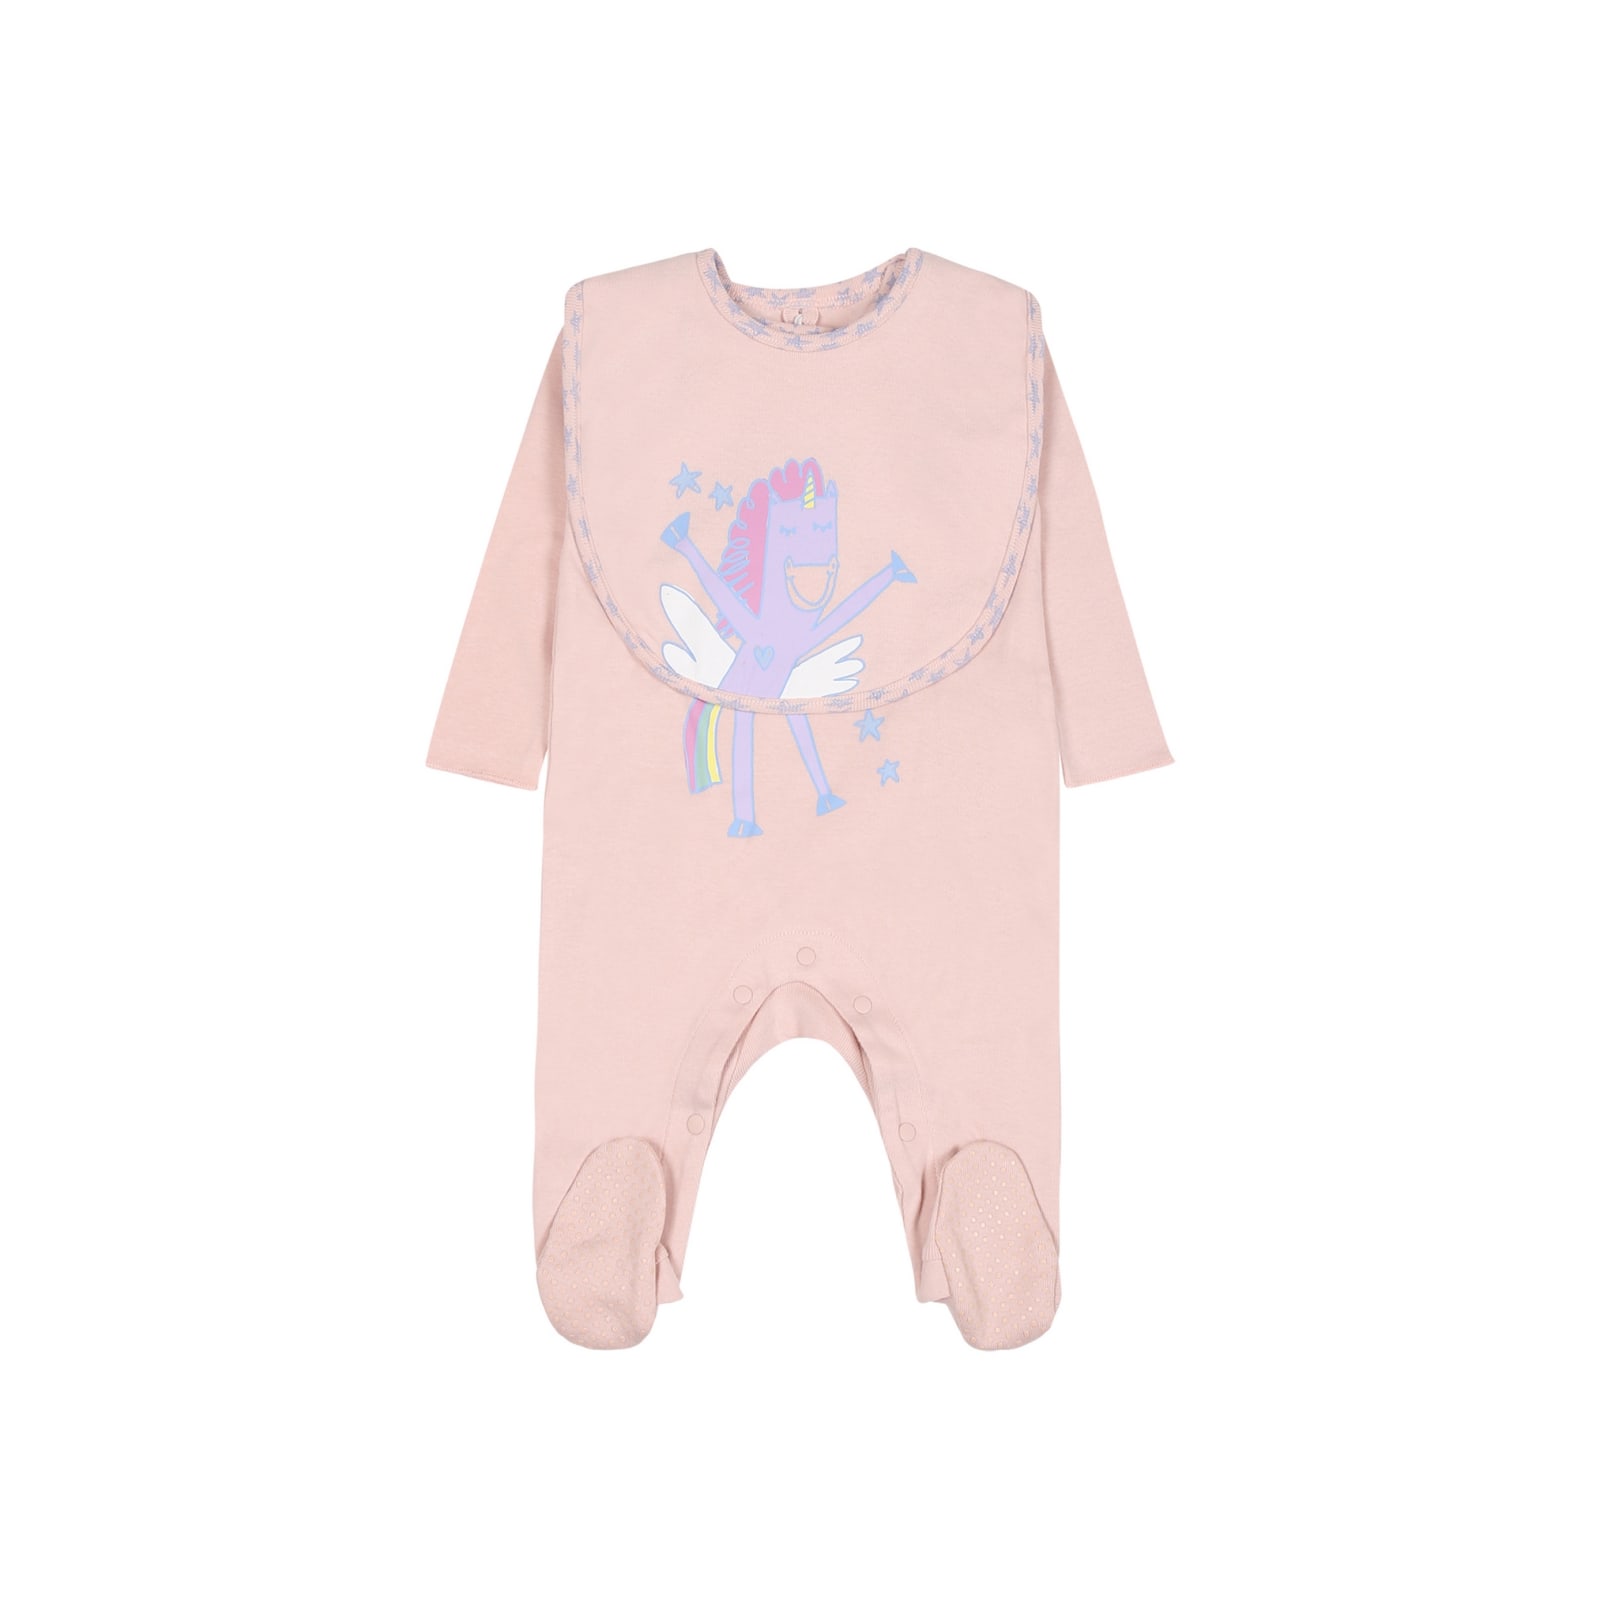 Stella Mccartney Pink Set For Baby Girl With Printed Unicorn